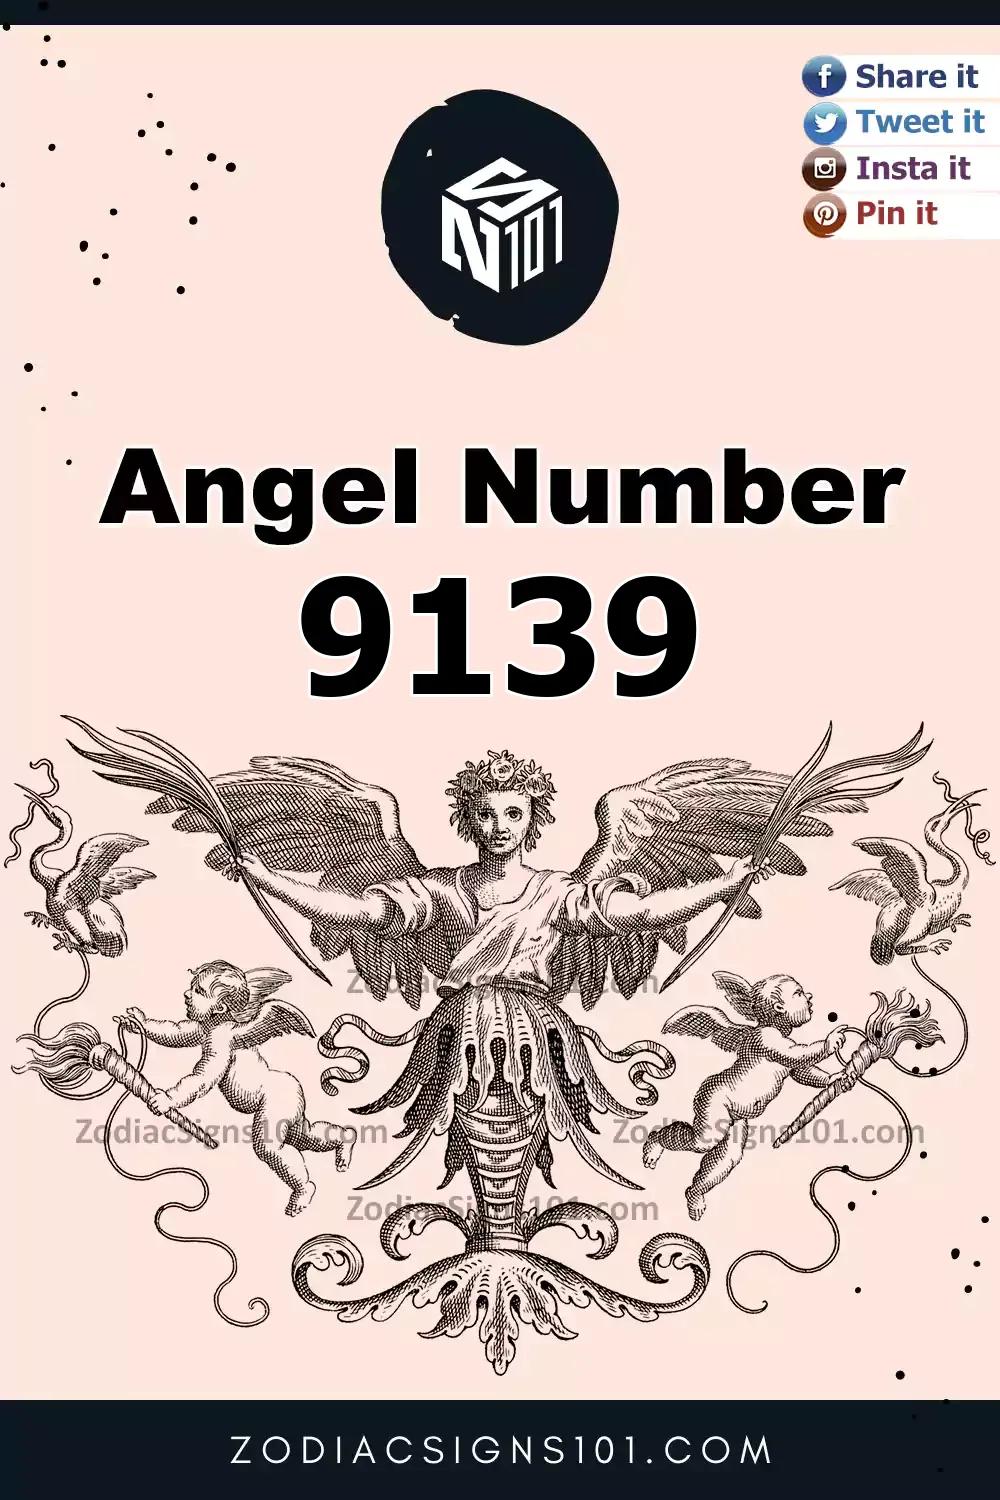 9139 Angel Number Meaning